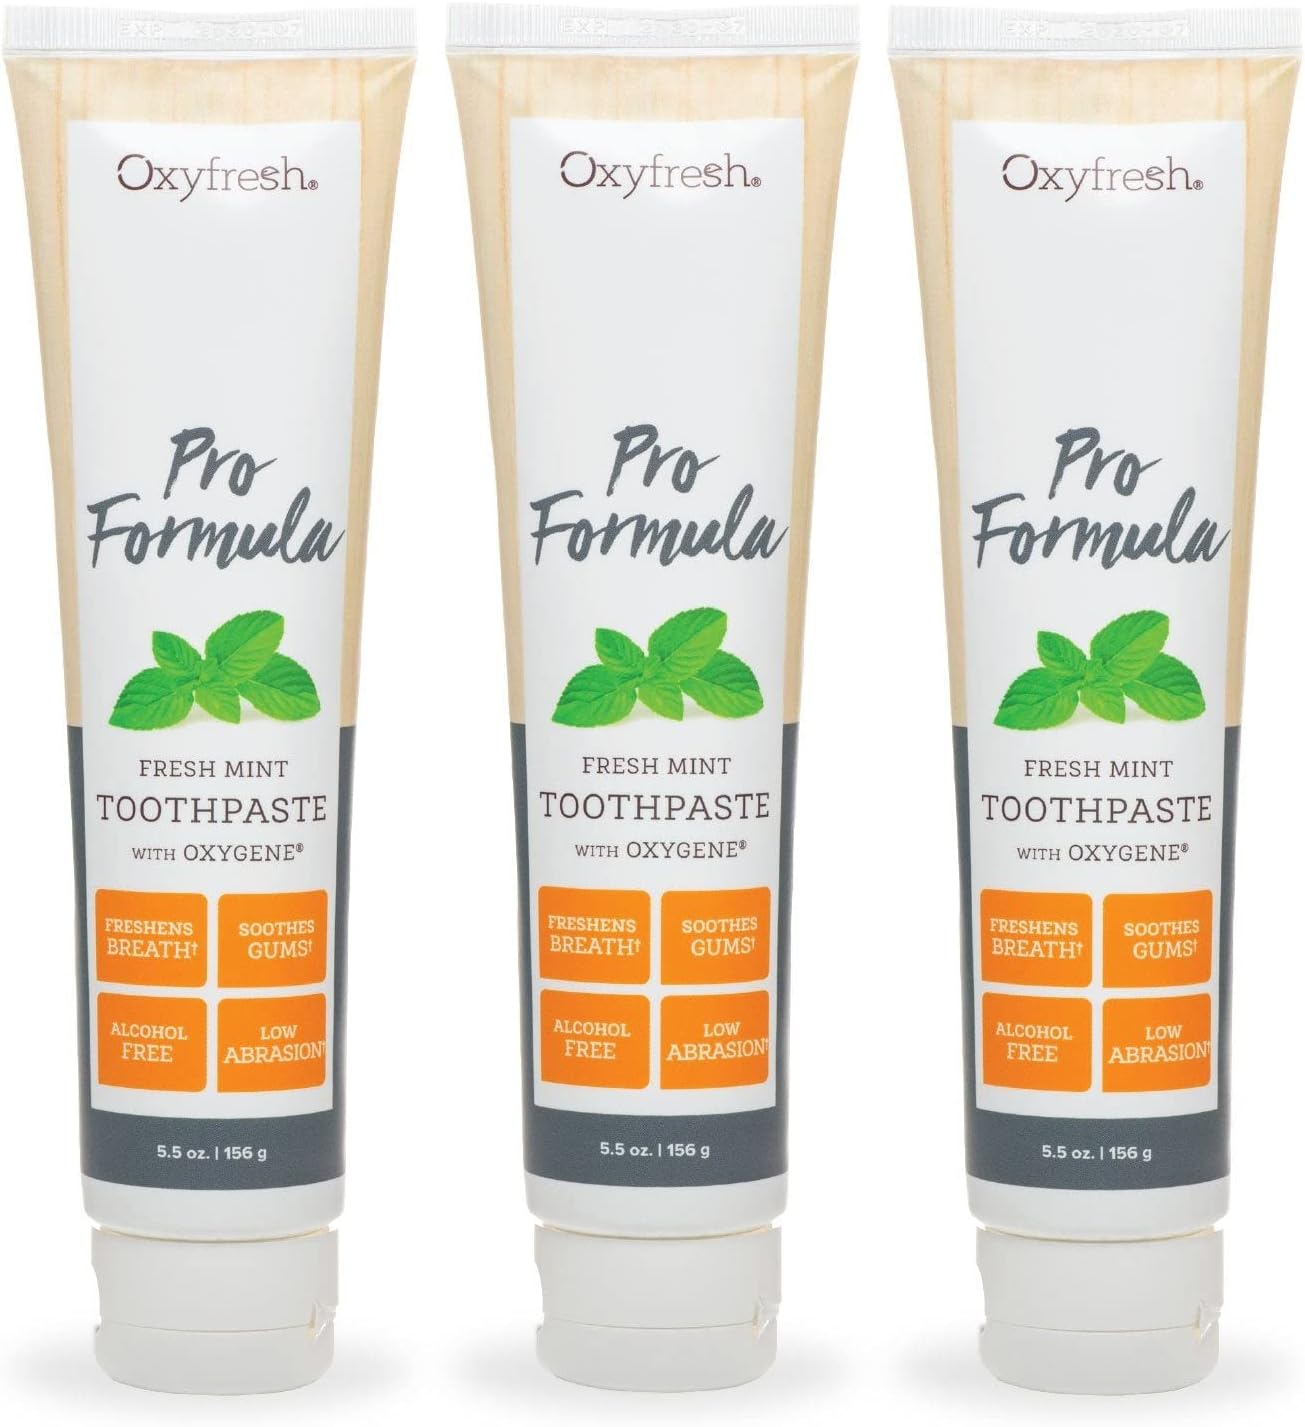 Oxyfresh Pro Formula Fresh Mint Toothpaste – Gentle Low Abrasion - Cosmetic Fluoride Free Formula - Great for Sensitive Teeth and Gums with Natural Essential Oils. 5.5 oz. (3 Pack)